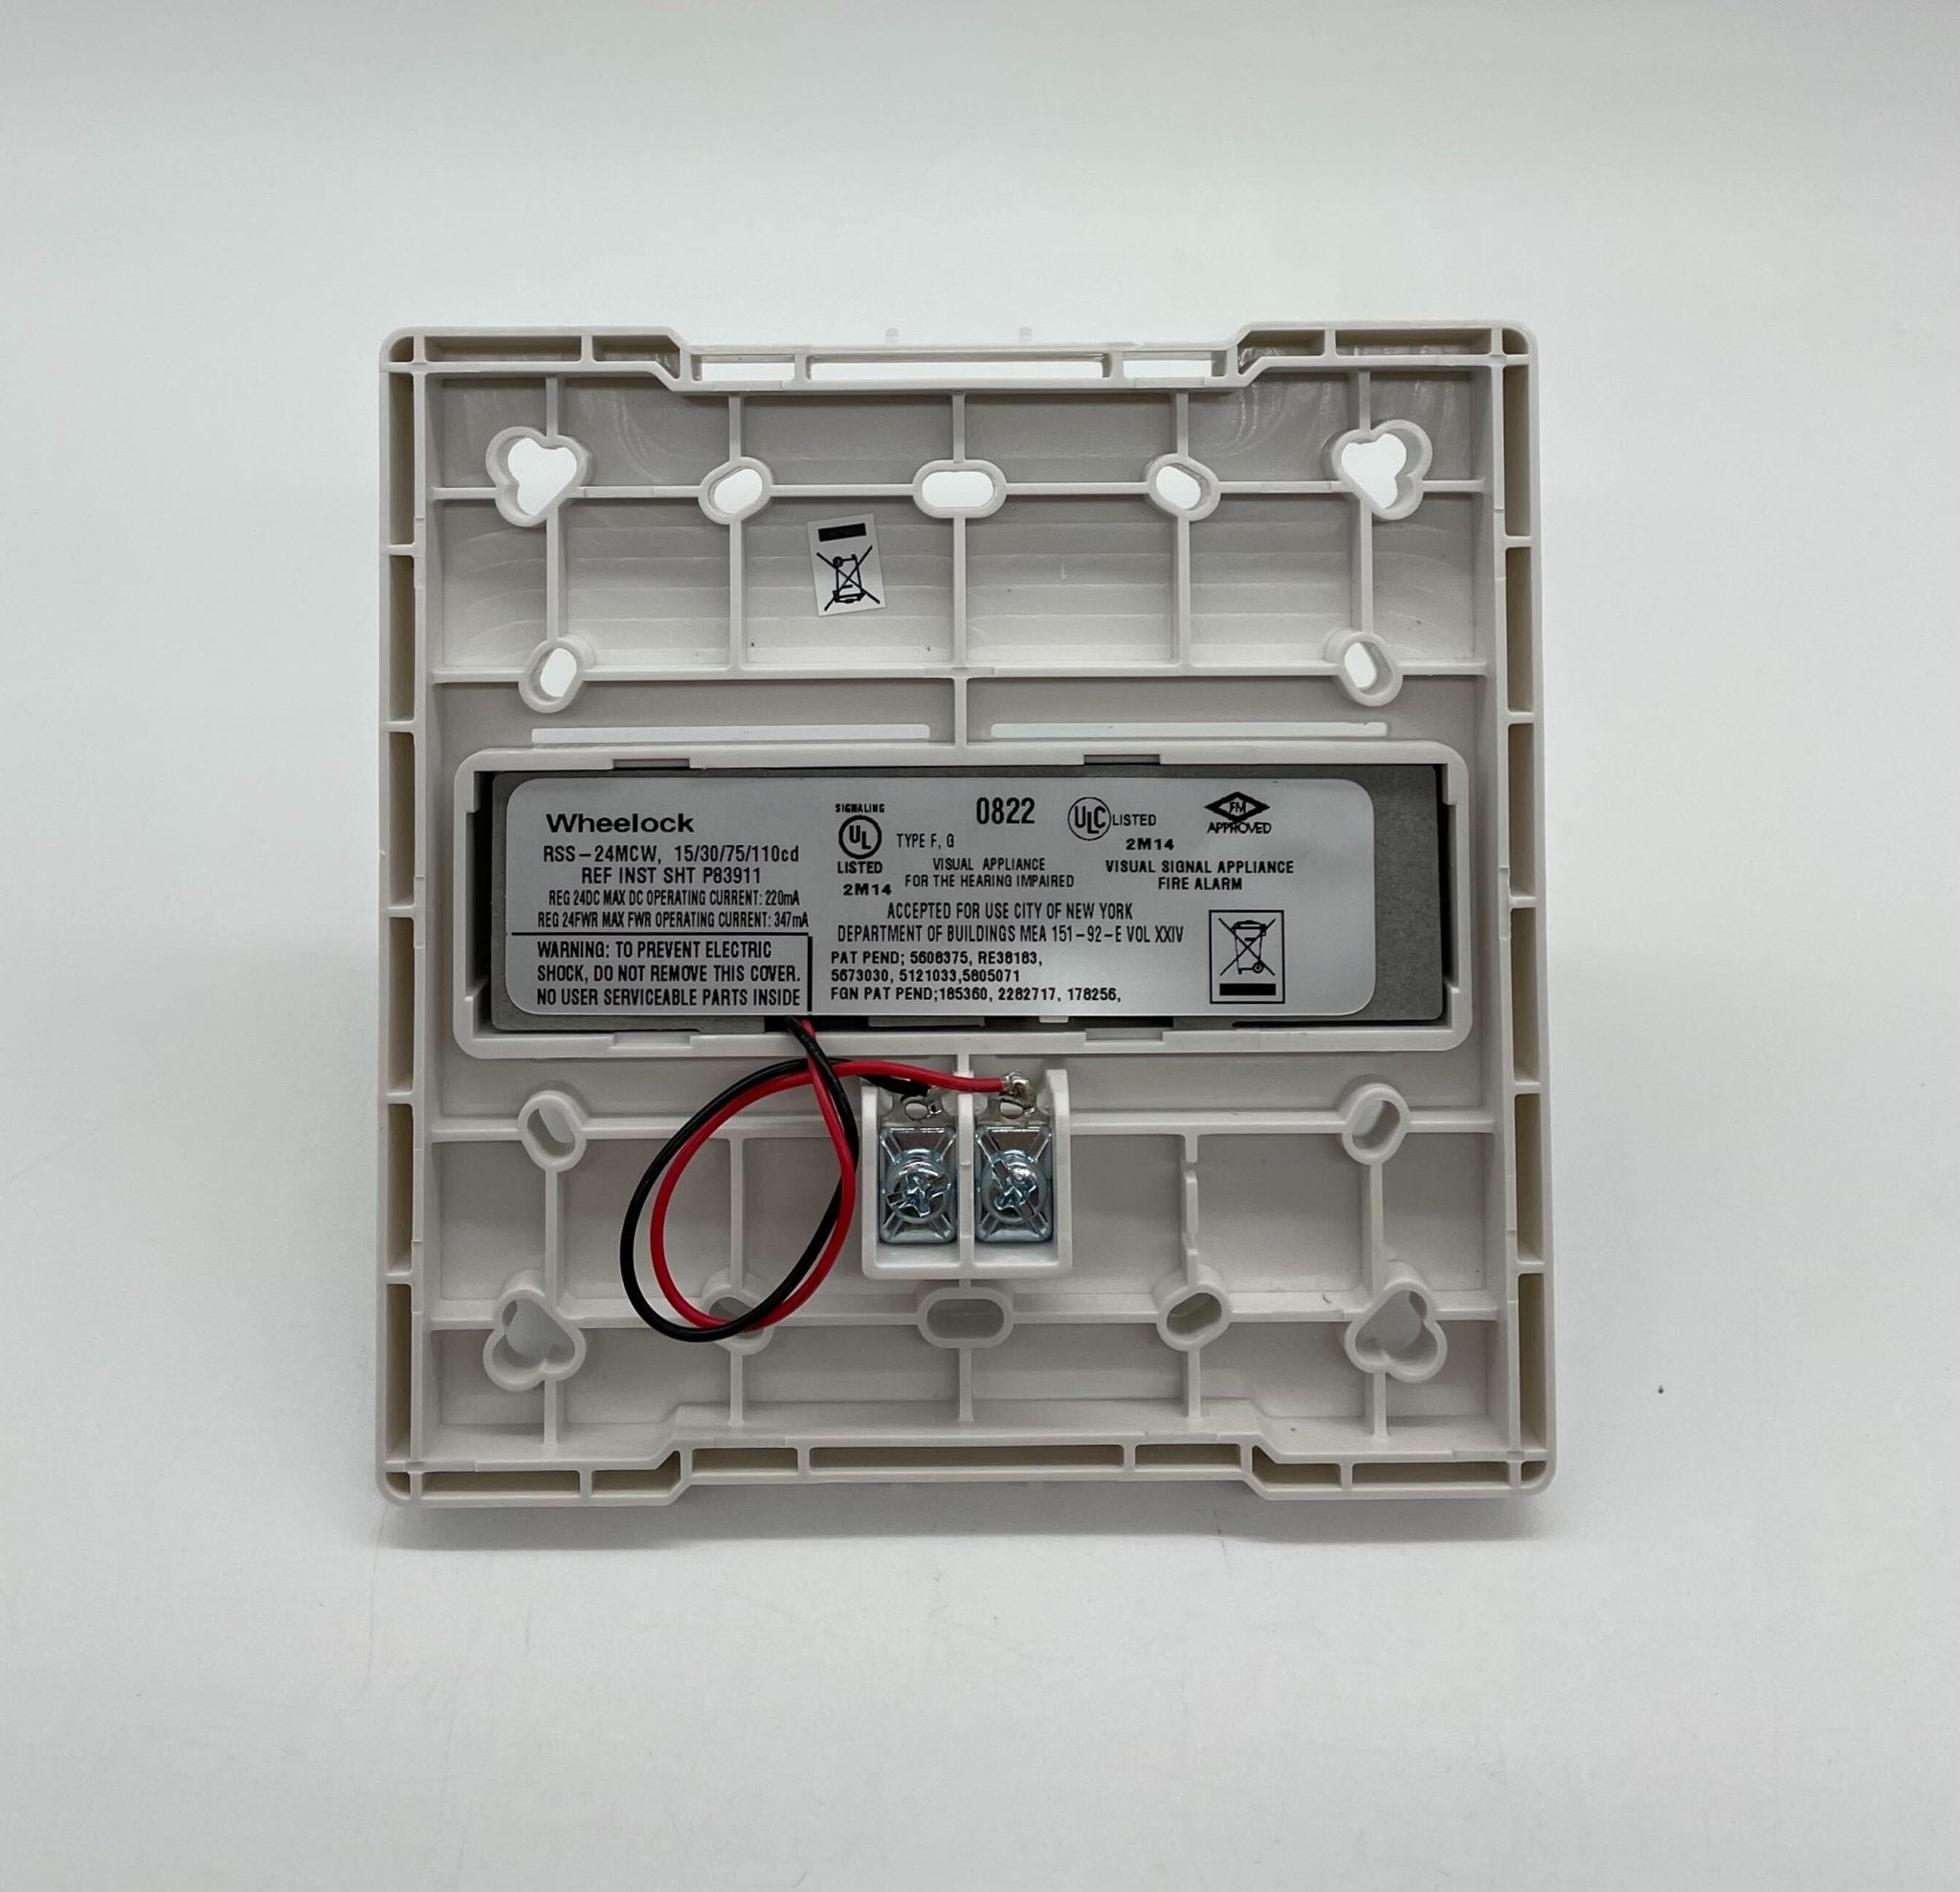 Wheelock RSS-24MCW-ALR - The Fire Alarm Supplier